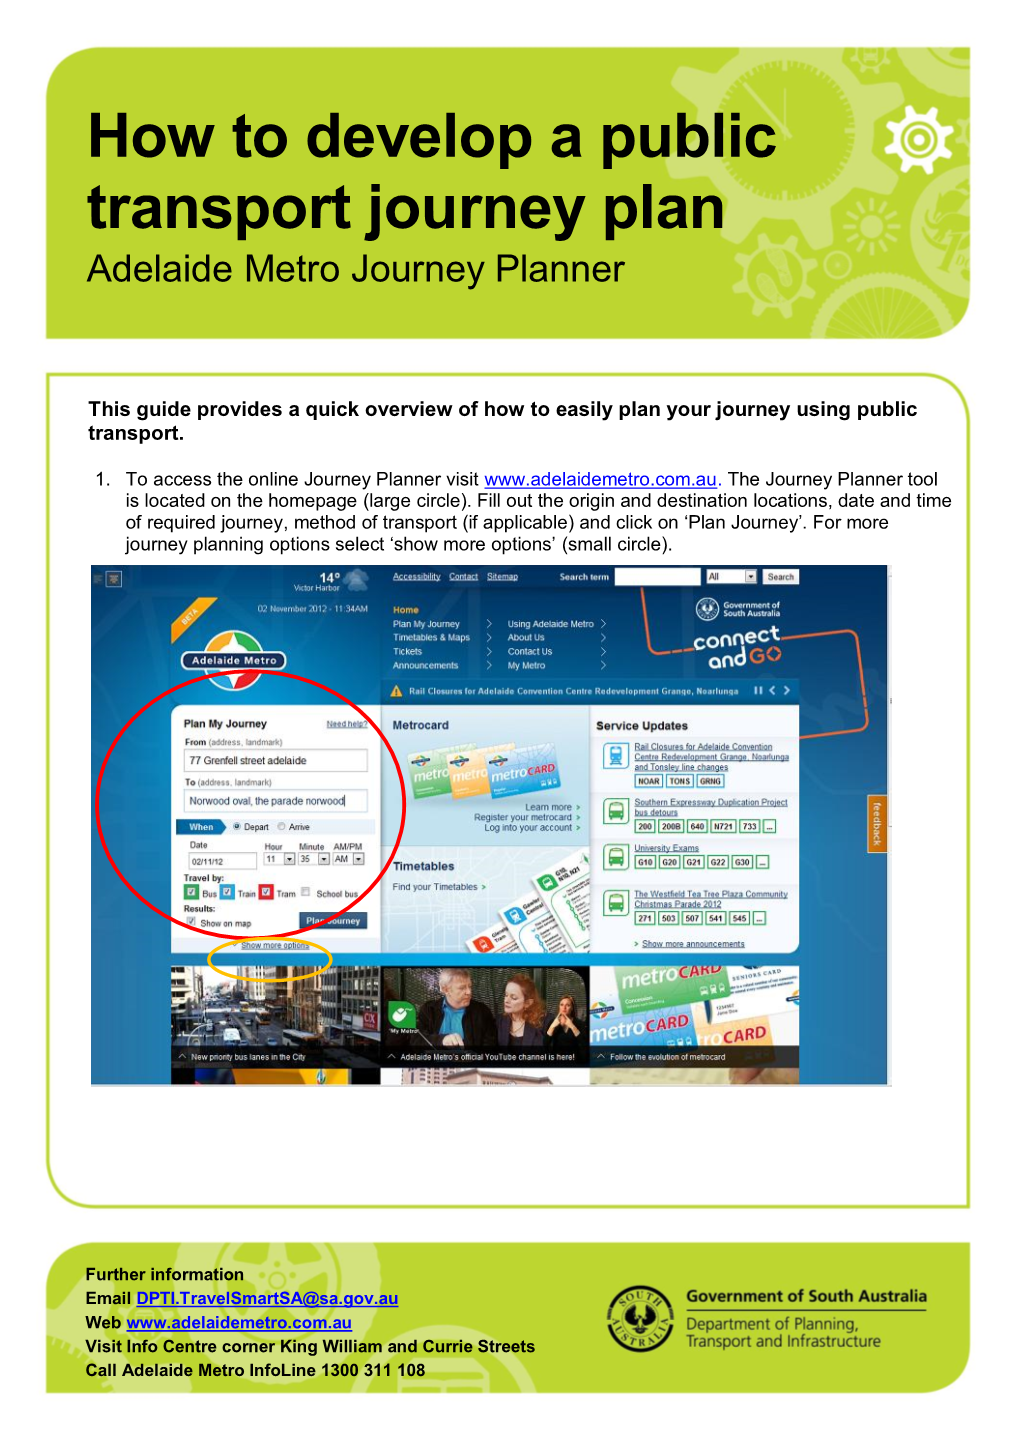 How to Develop a Public Transport Journey Plan Adelaide Metro Journey Planner